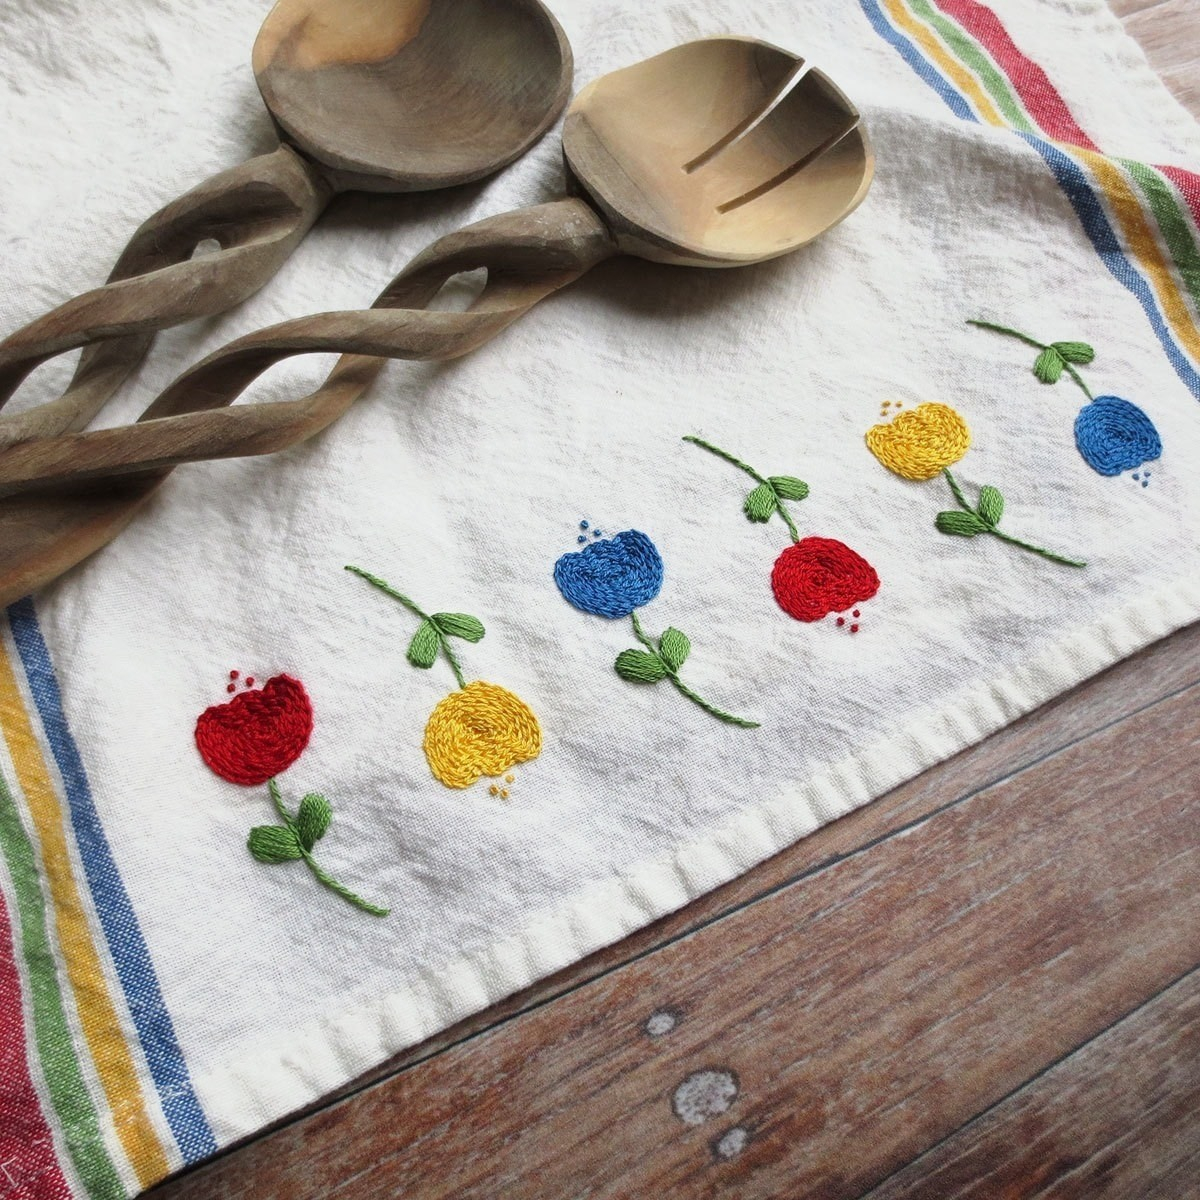 How To Make An Embroidery Pattern Embroidered Tulip Tea Towel How To Make A Tea Towel Needlework